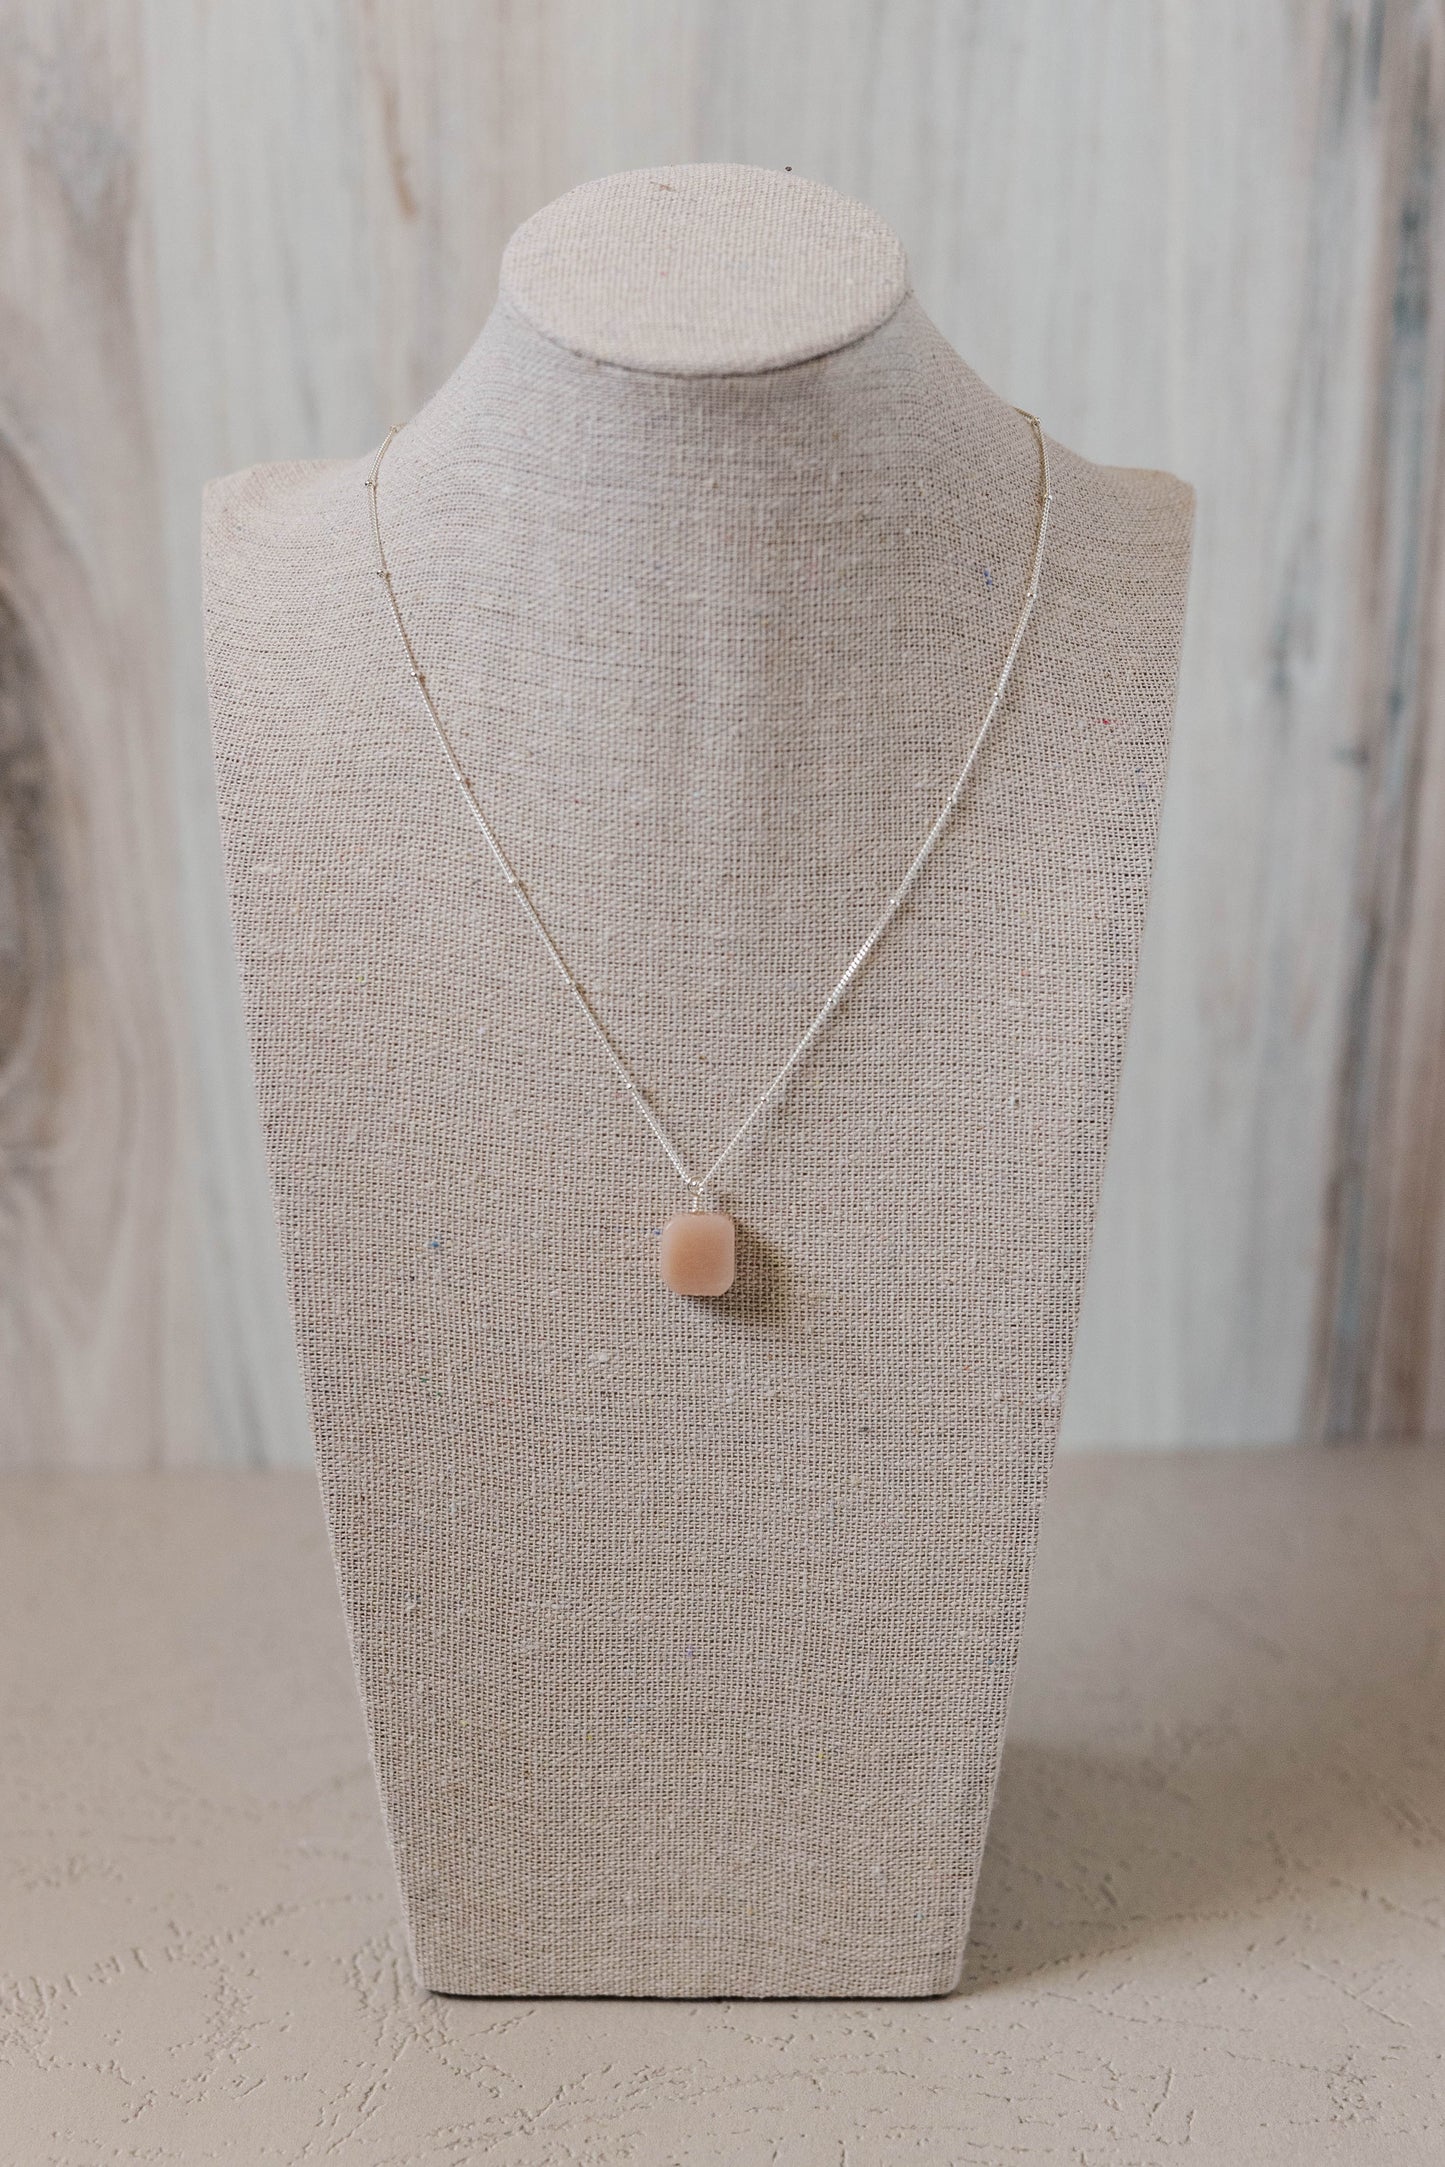 Just Peachy Necklace